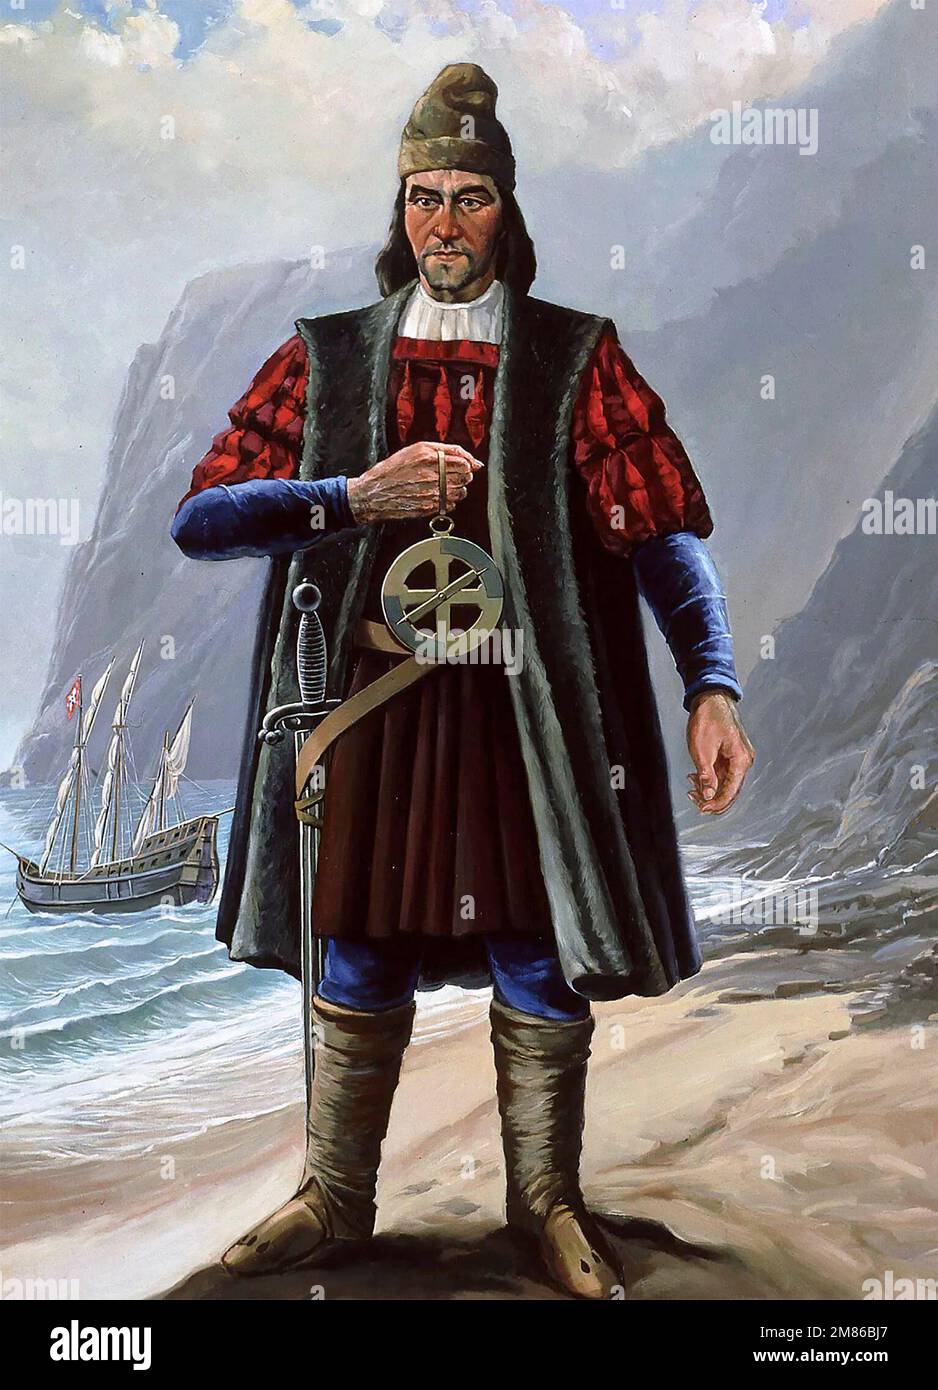 Bartolomeu Dias. Portrait of the Portuguese explorer and mariner, Bartolomeu Dias (c. 1450-1500). Dias was the first person to sail around the southern tip of Africa in 1488. Stock Photo